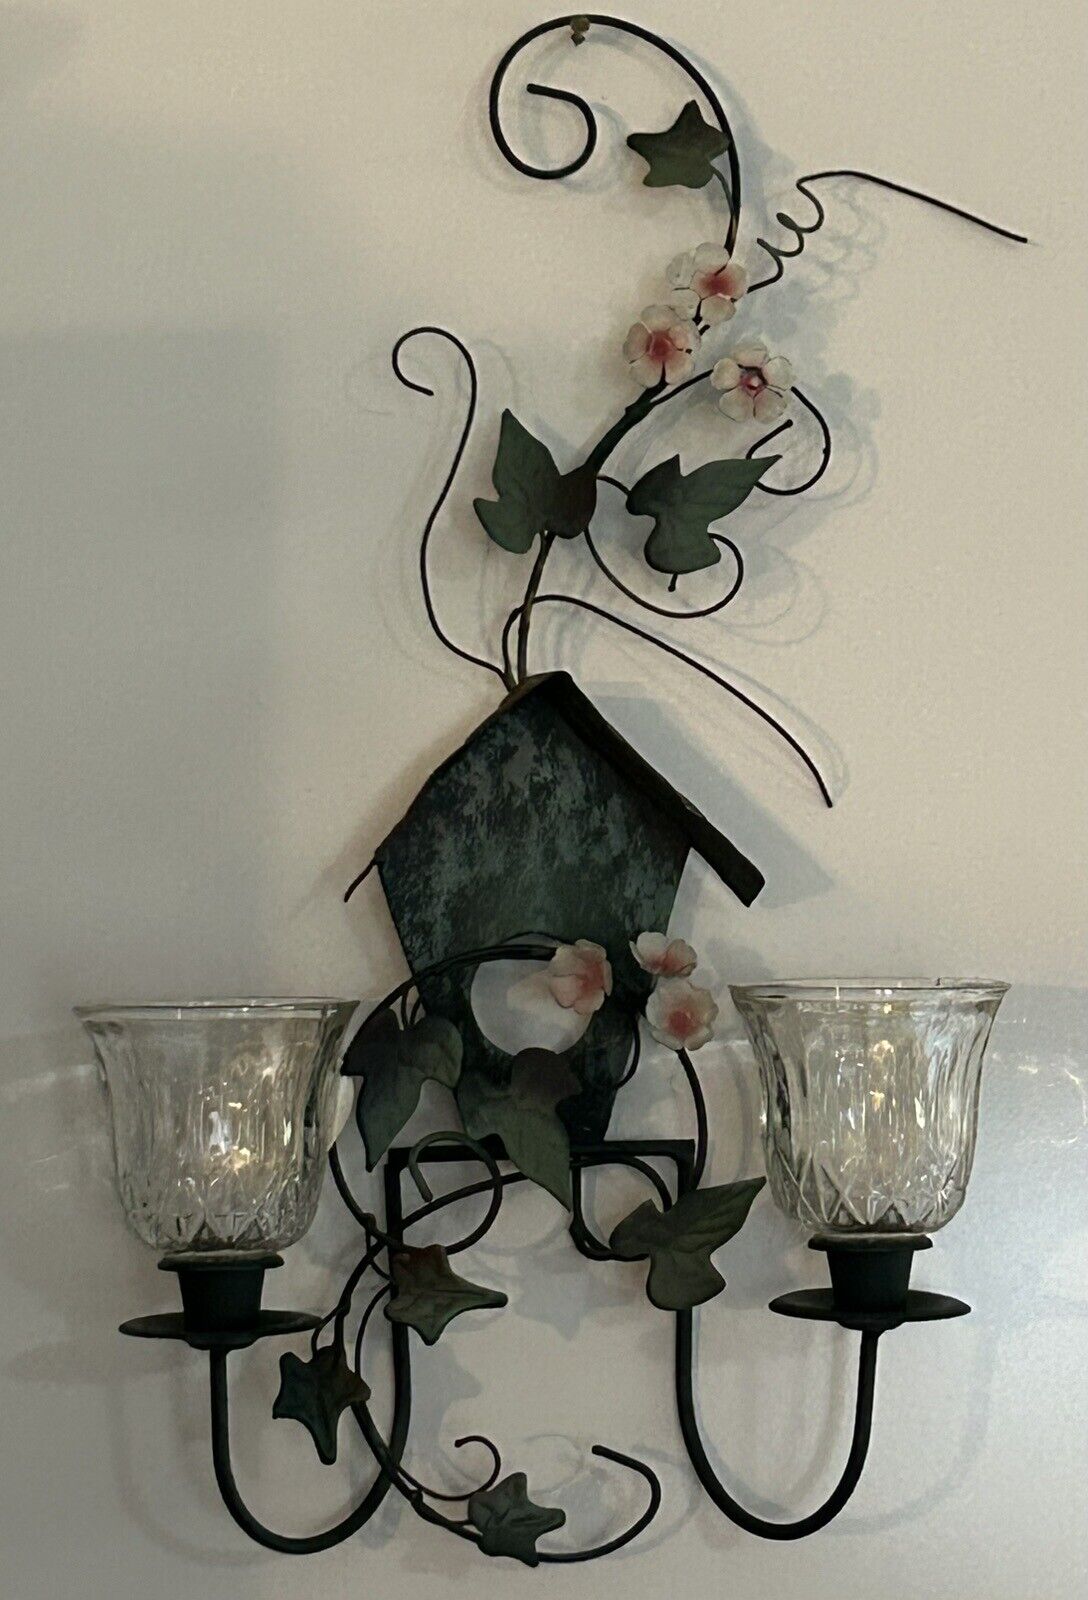 VTG HOMCO BIRDHOUSE WALL MOUNT SCONCE METAL FLORAL GREEN W/GLASS VOTIVE CUPS